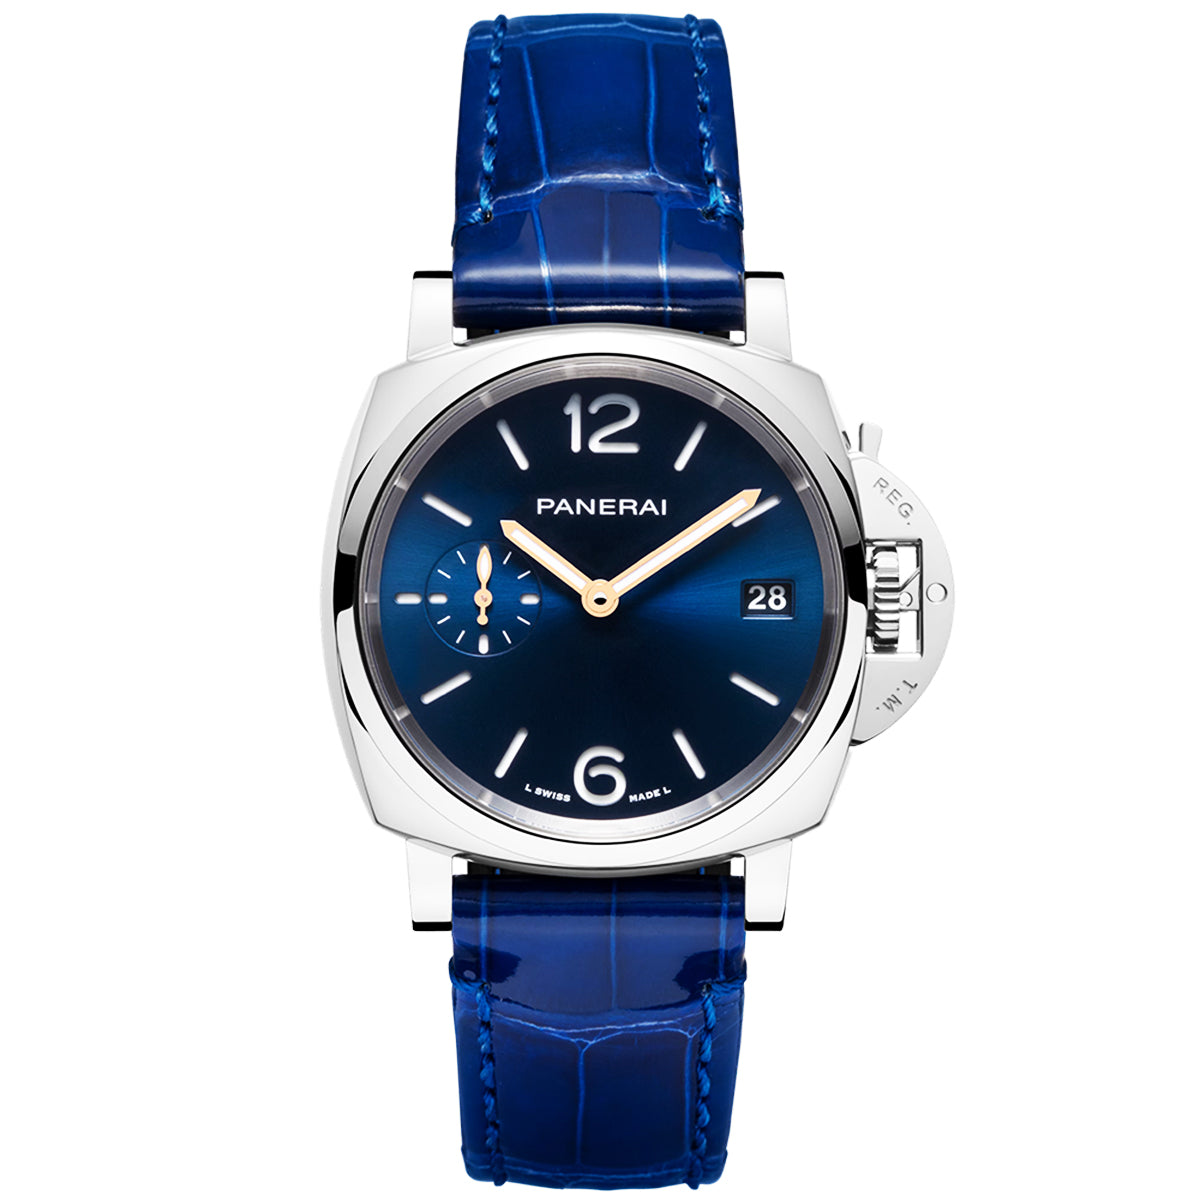 Luminor Due 38mm Blue/Rose Dial Automatic Leather Strap Watch